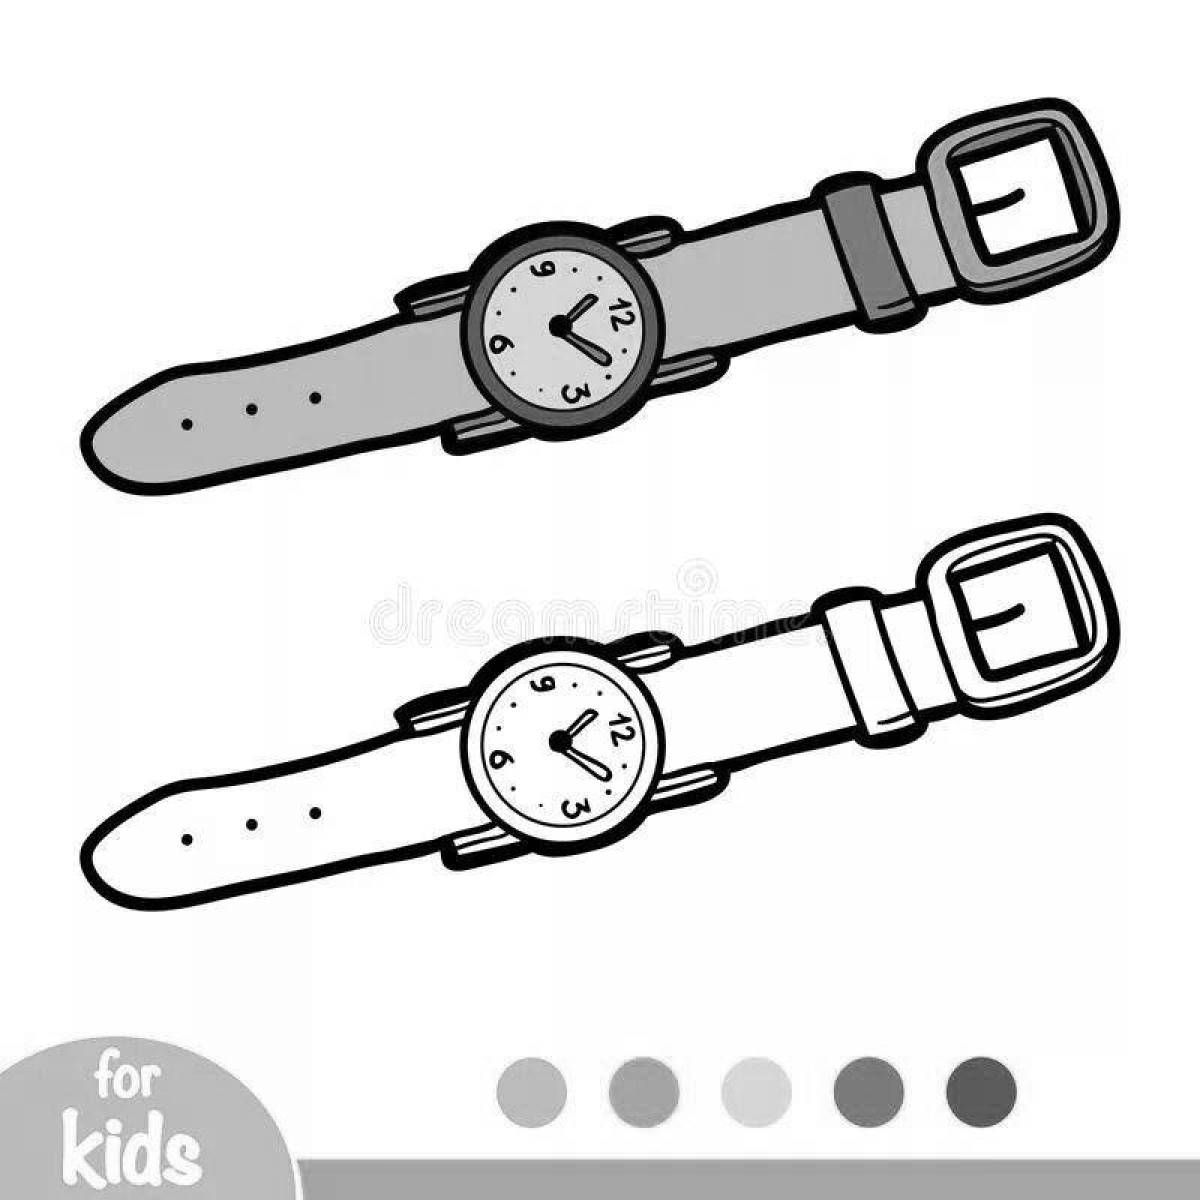 Coloring bright wrist watch